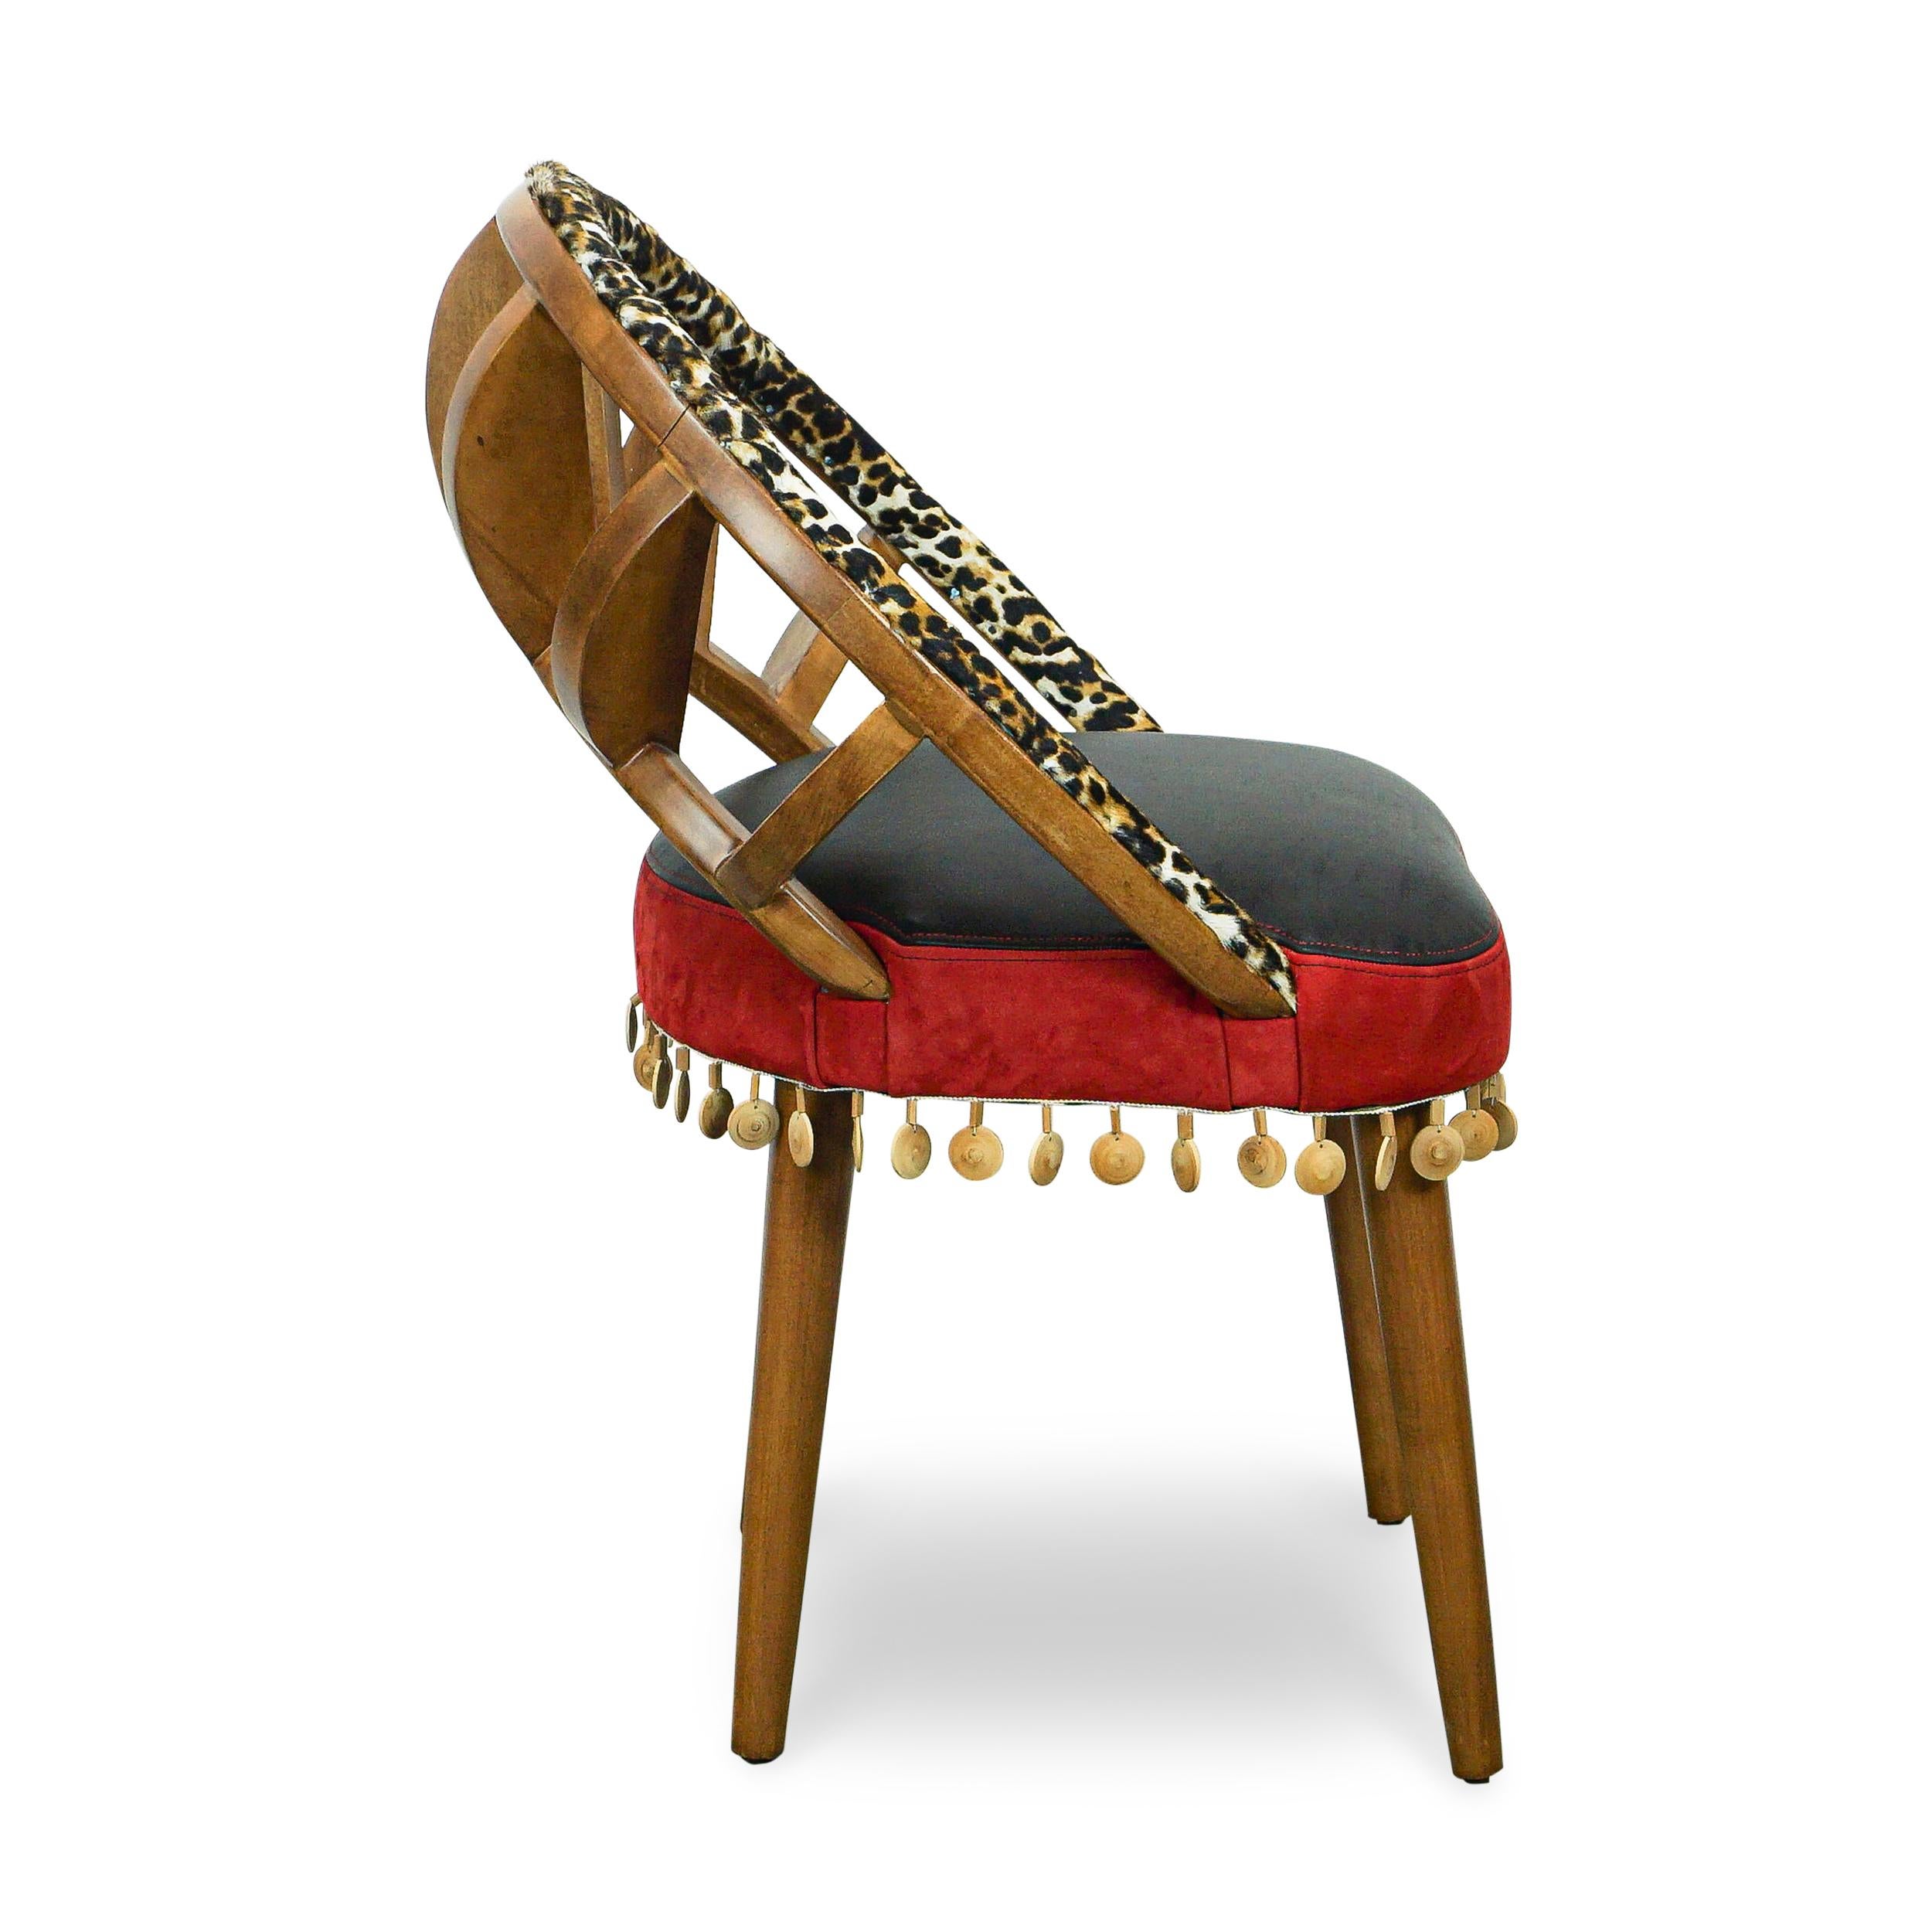 Ribbed Wood Chair with Cheetah Hair on Hide, Red + Black Leather and Wood Bead In New Condition For Sale In Greenwich, CT